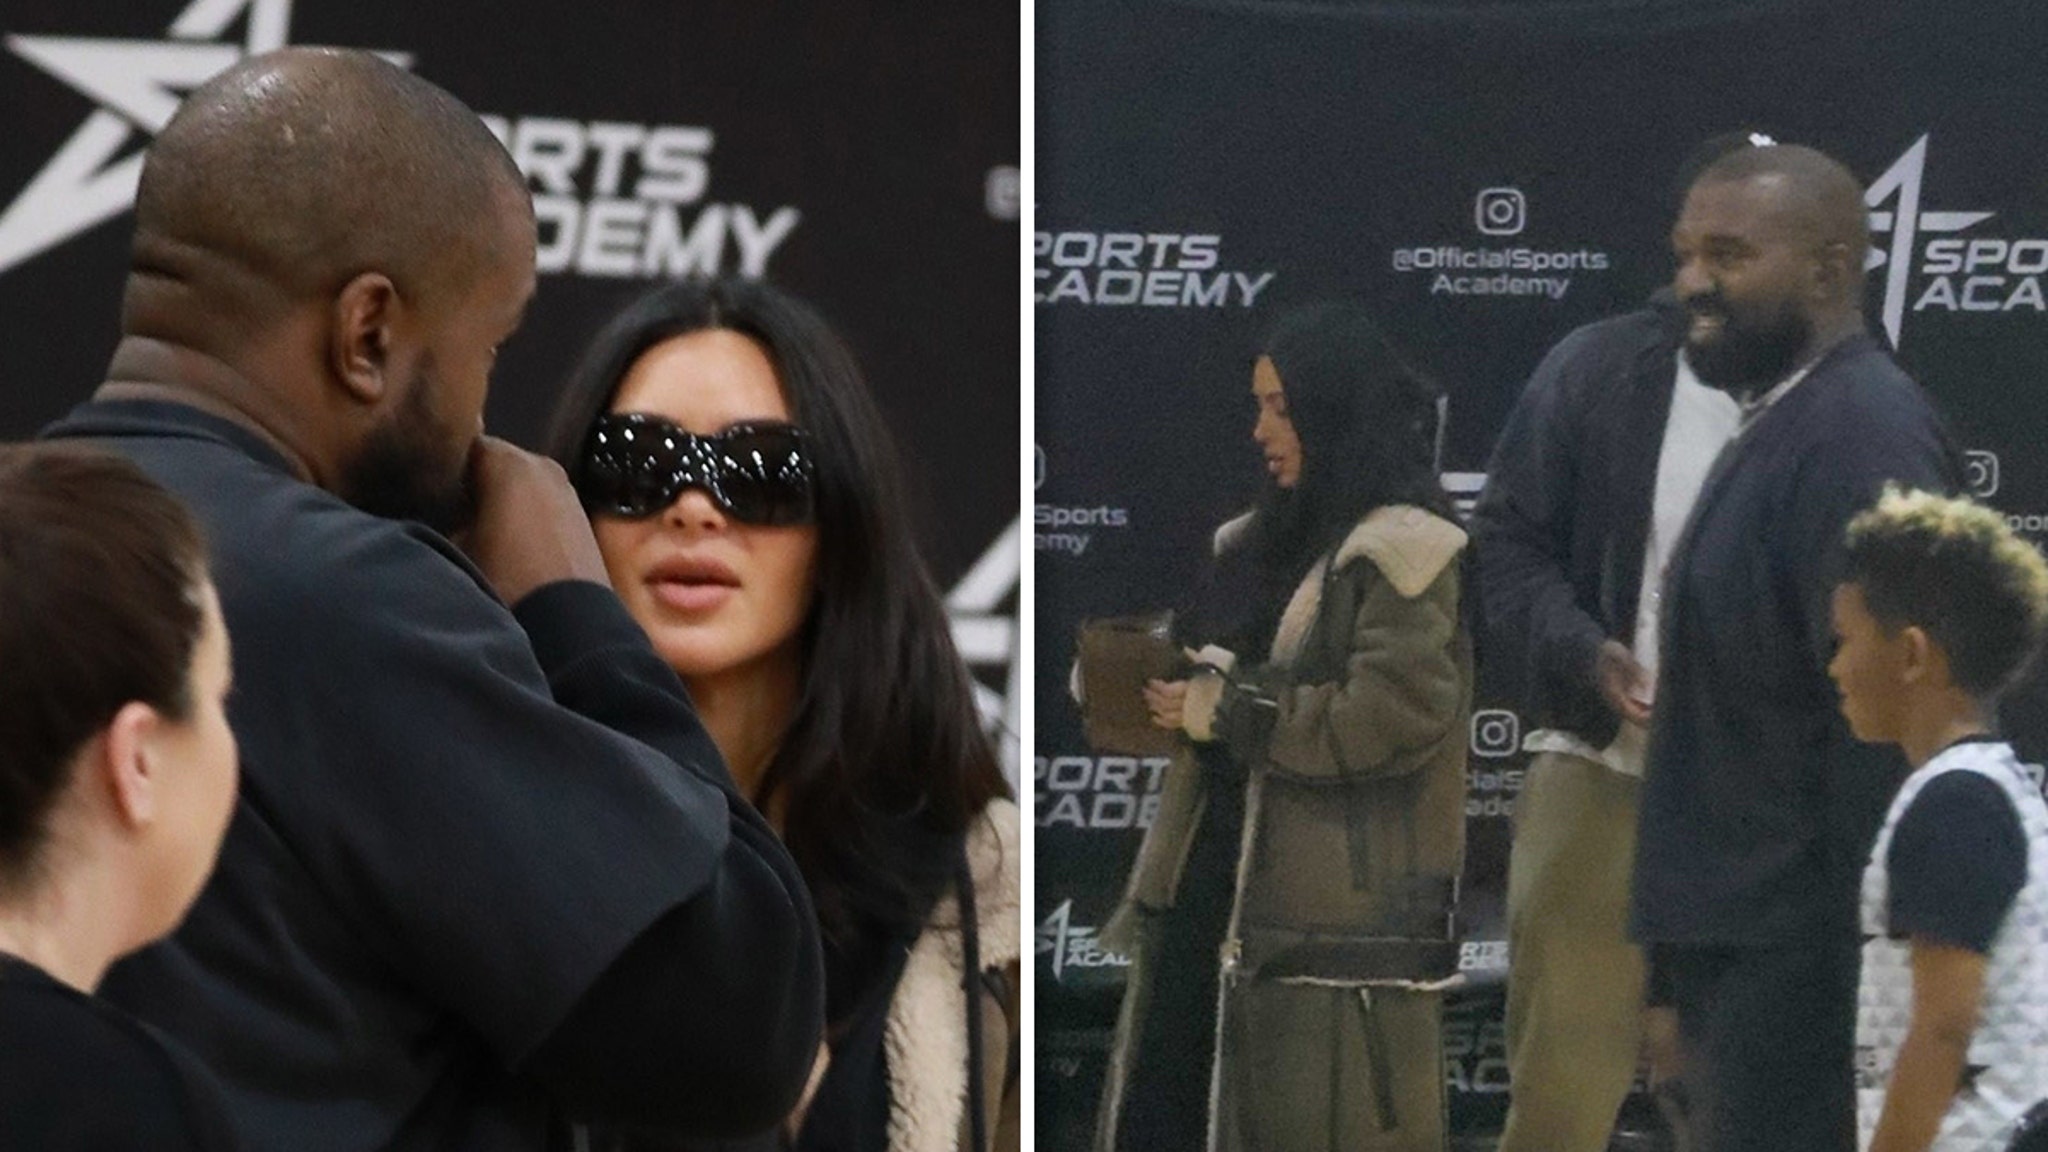 Kim Kardashian and Kanye West Have Another Frosty Encounter at Saint's Basketball Game